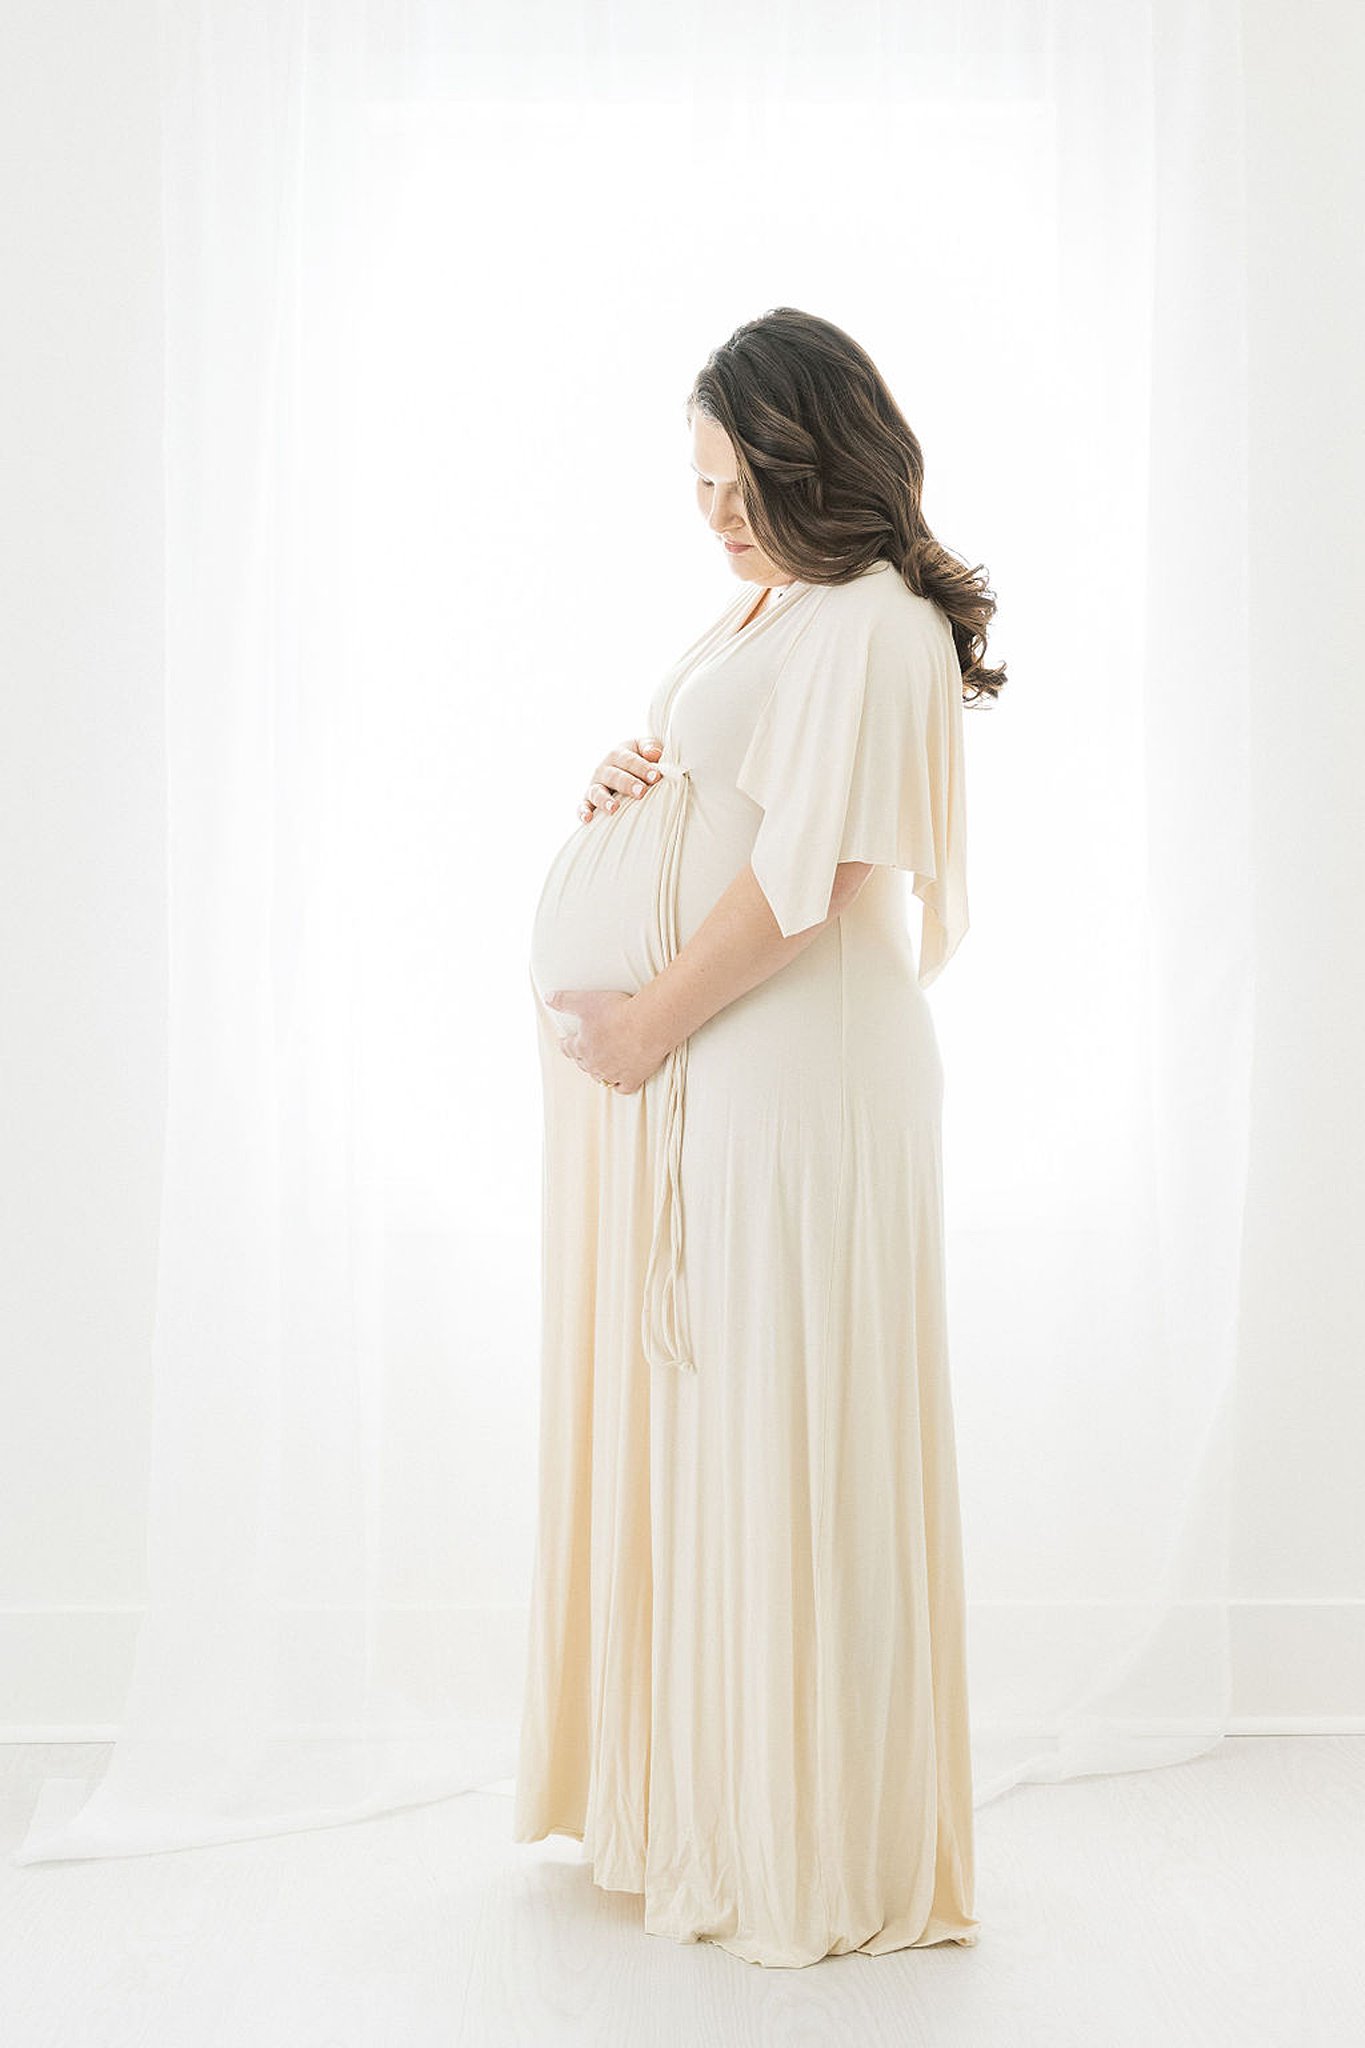 Mother-to-be stands in front of a window holding her bump with both hands and gazing down at it